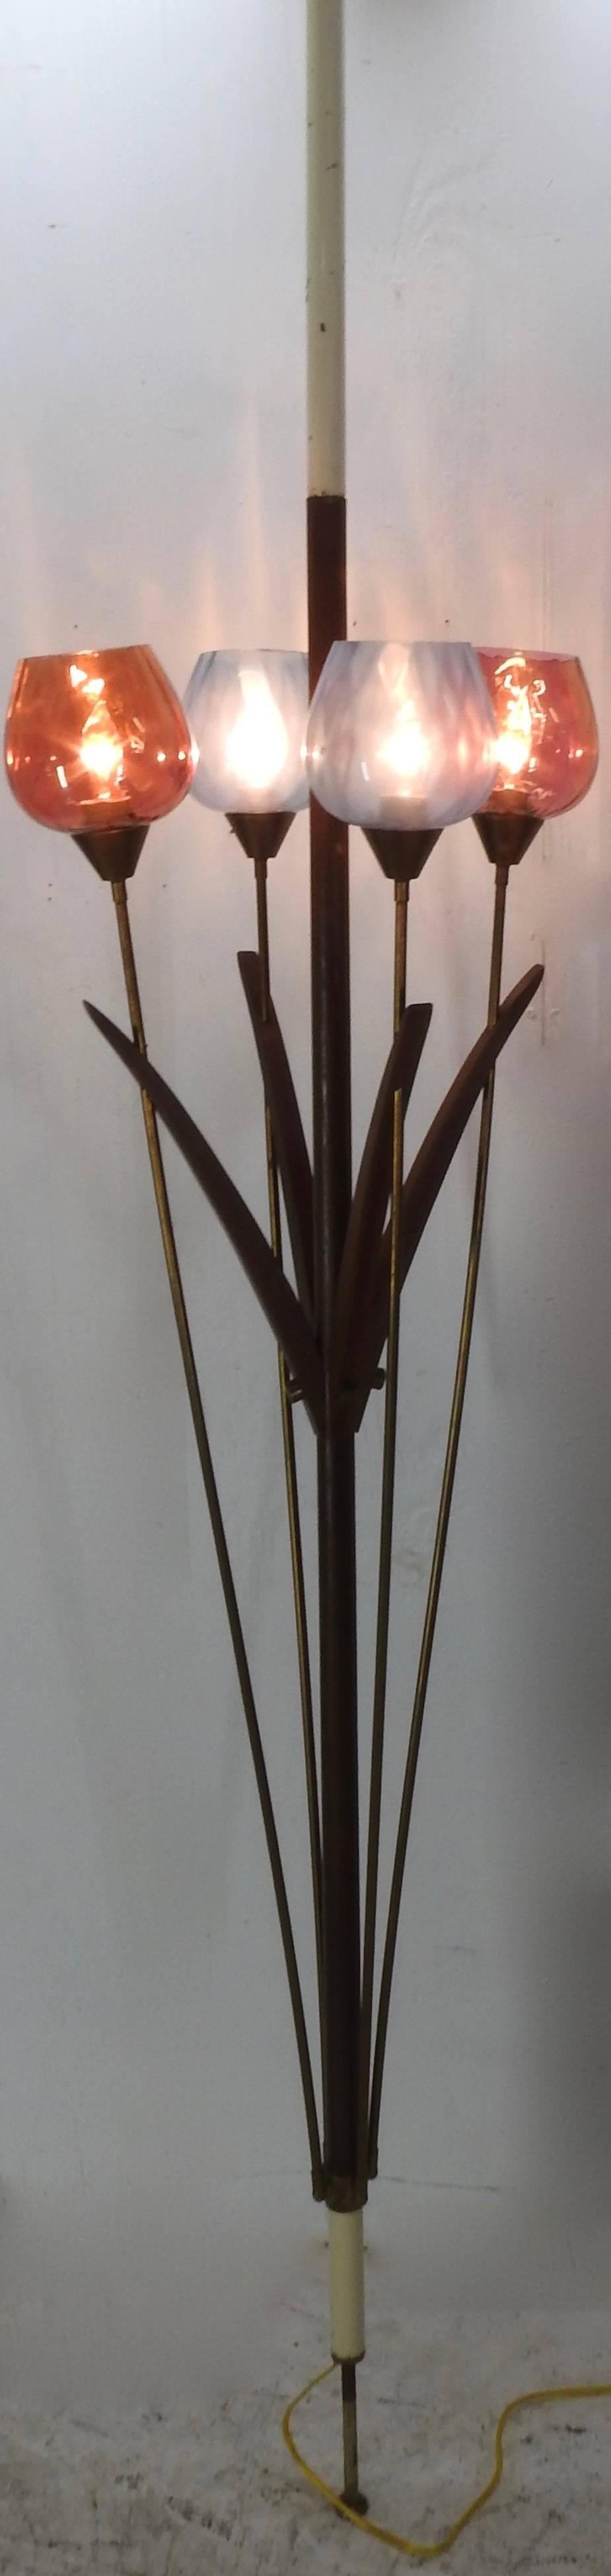 Italian Mid-Century Modern Teak and Glass Tension Lamp For Sale 3